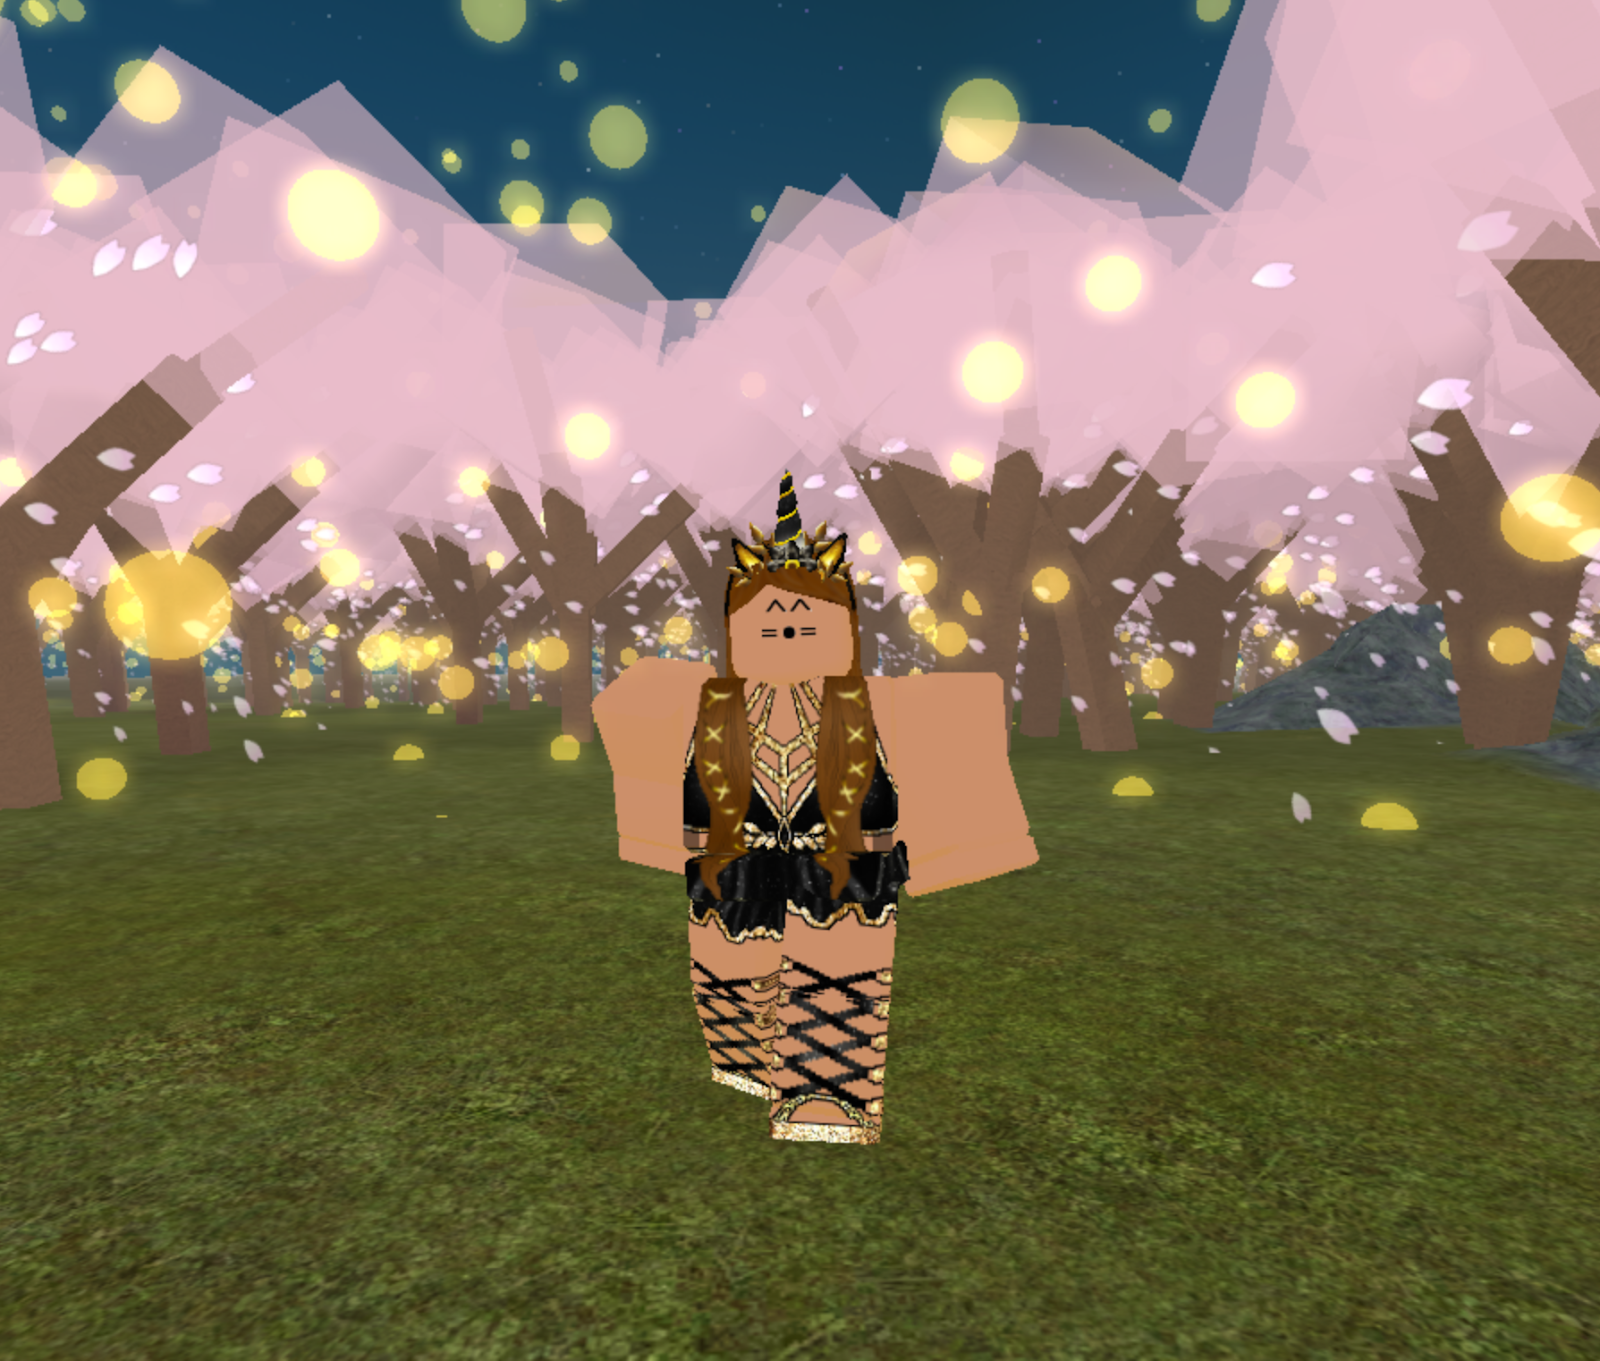 2019 New Year S Outfit - i took these photos in alexzana123 s build oo fireflies oo she is an amazing builder i really encourage you guys to check her work out she loves to build